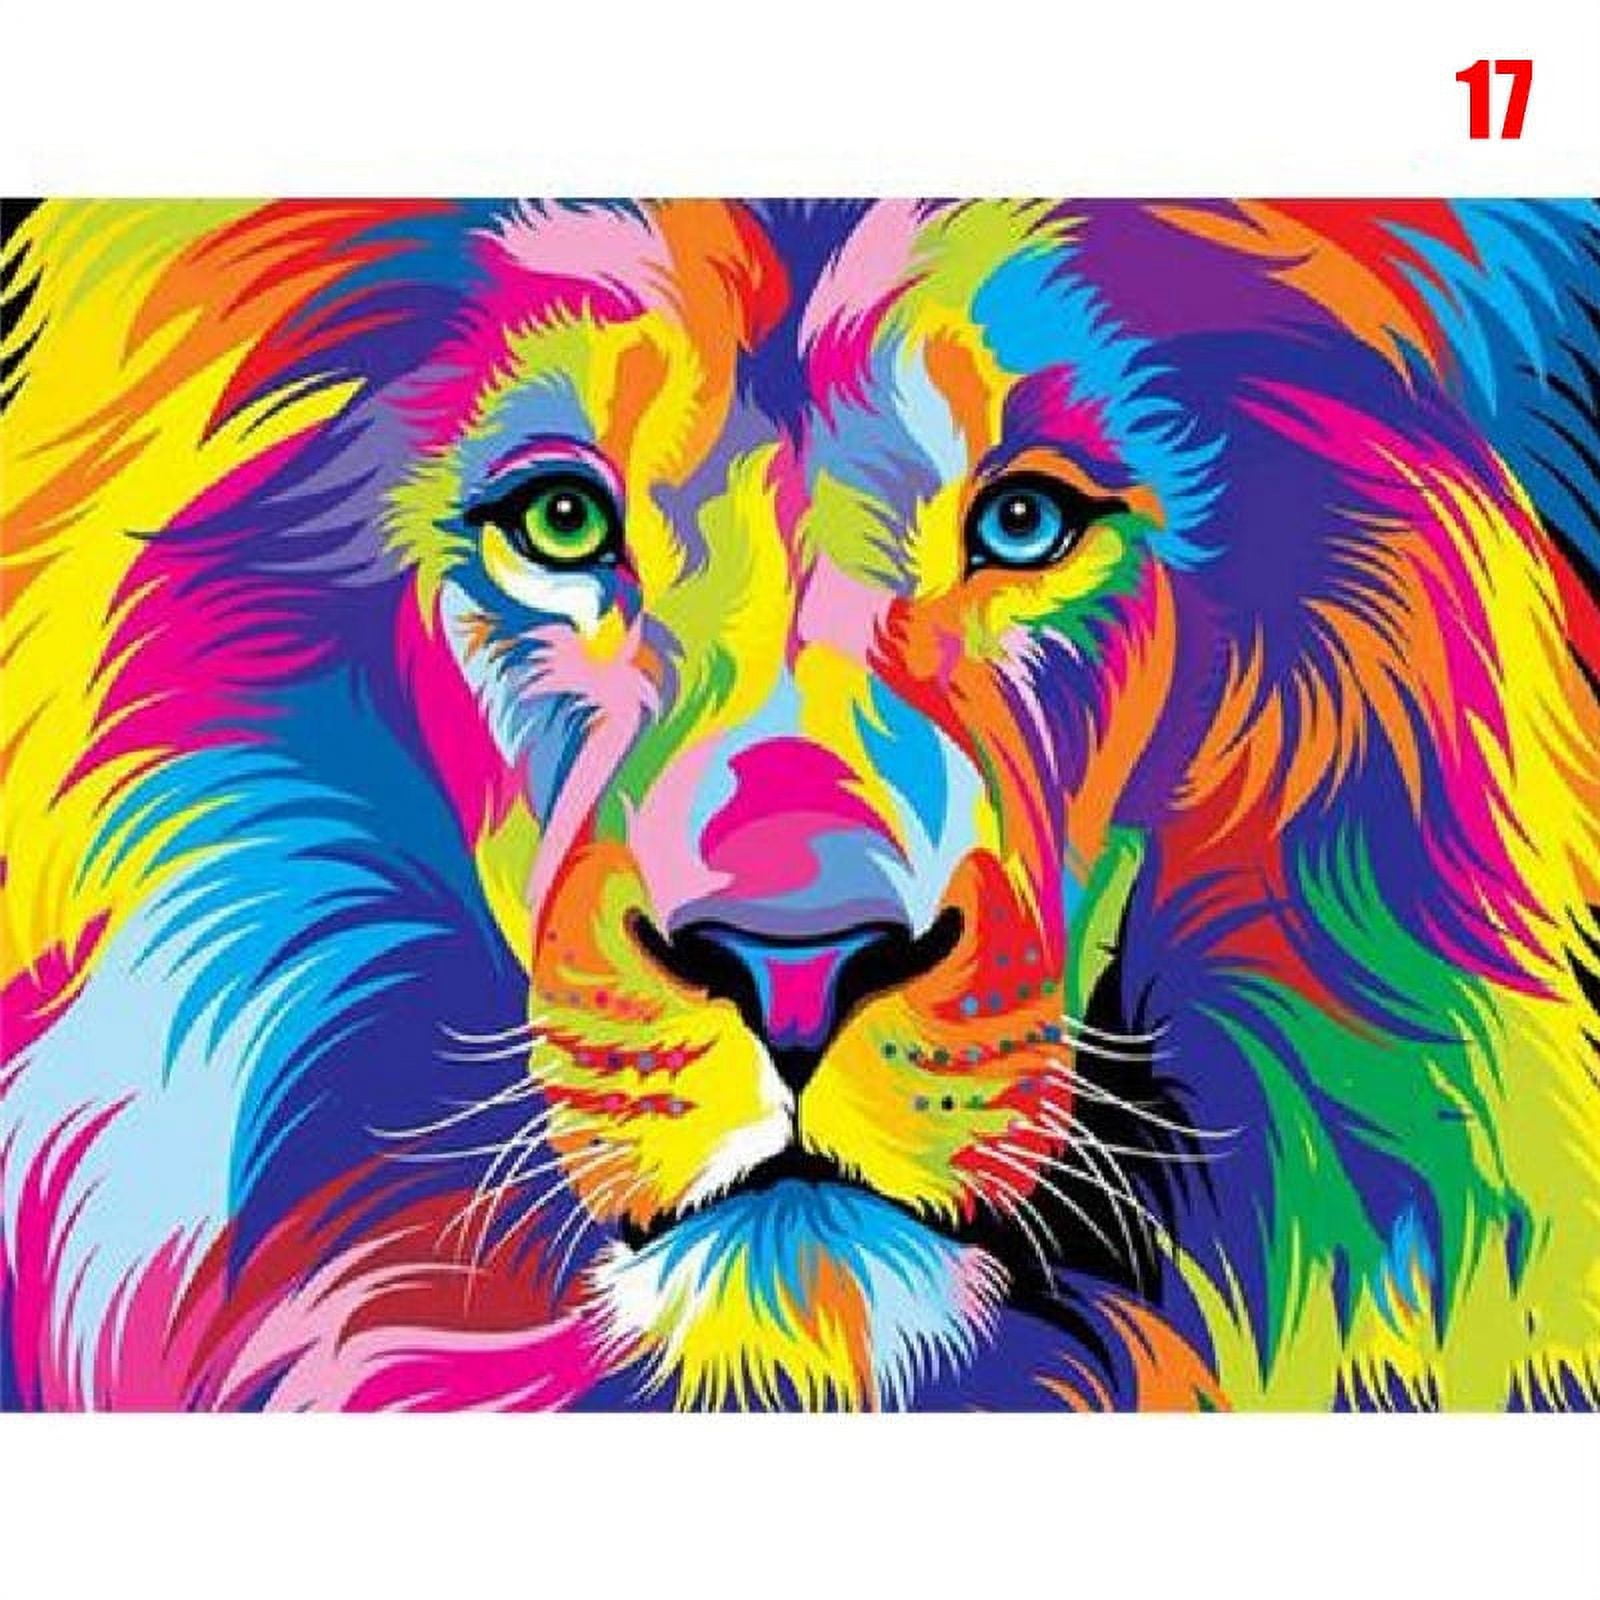 50x40cm Paints DIY Painting By Numbers Adult Hand Painted Animals Pictures  Oil Paint Gift Coloring Wall Decoration From Logo8888, $4.53